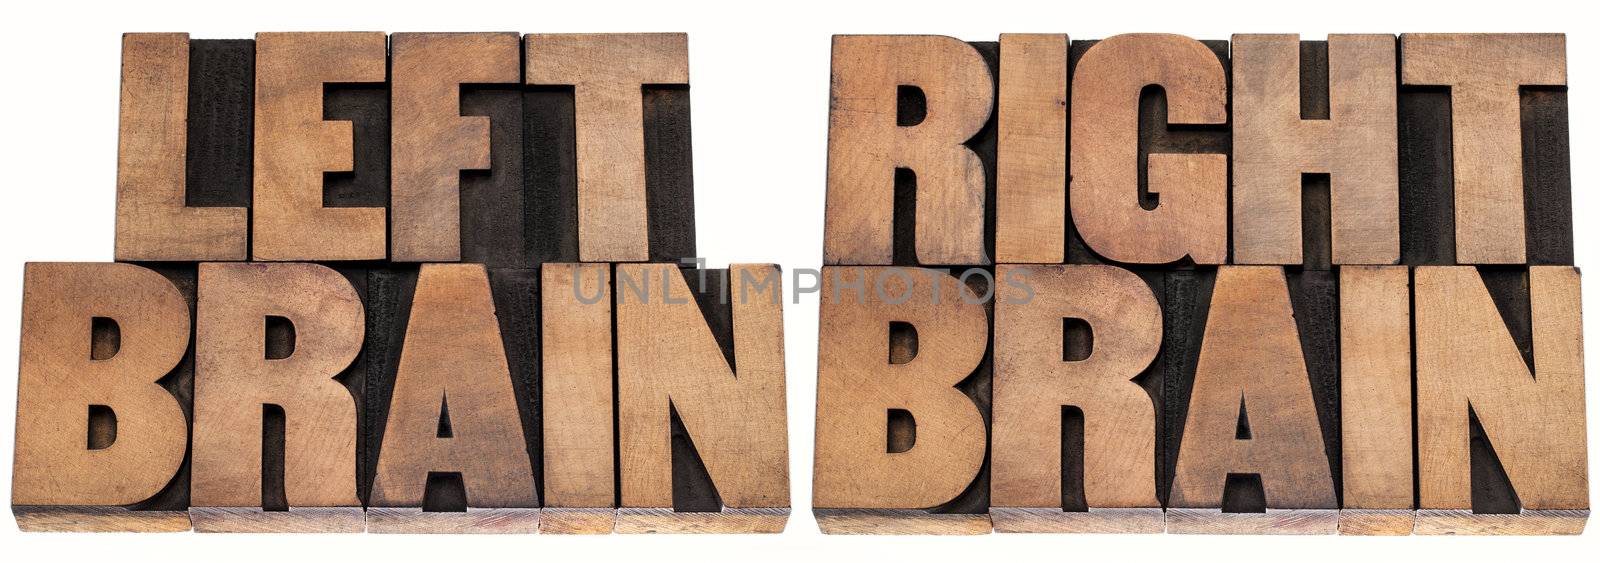 left brain and right brain  -  psychology concept - isolated text in vintage letterpress wood type printing blocks